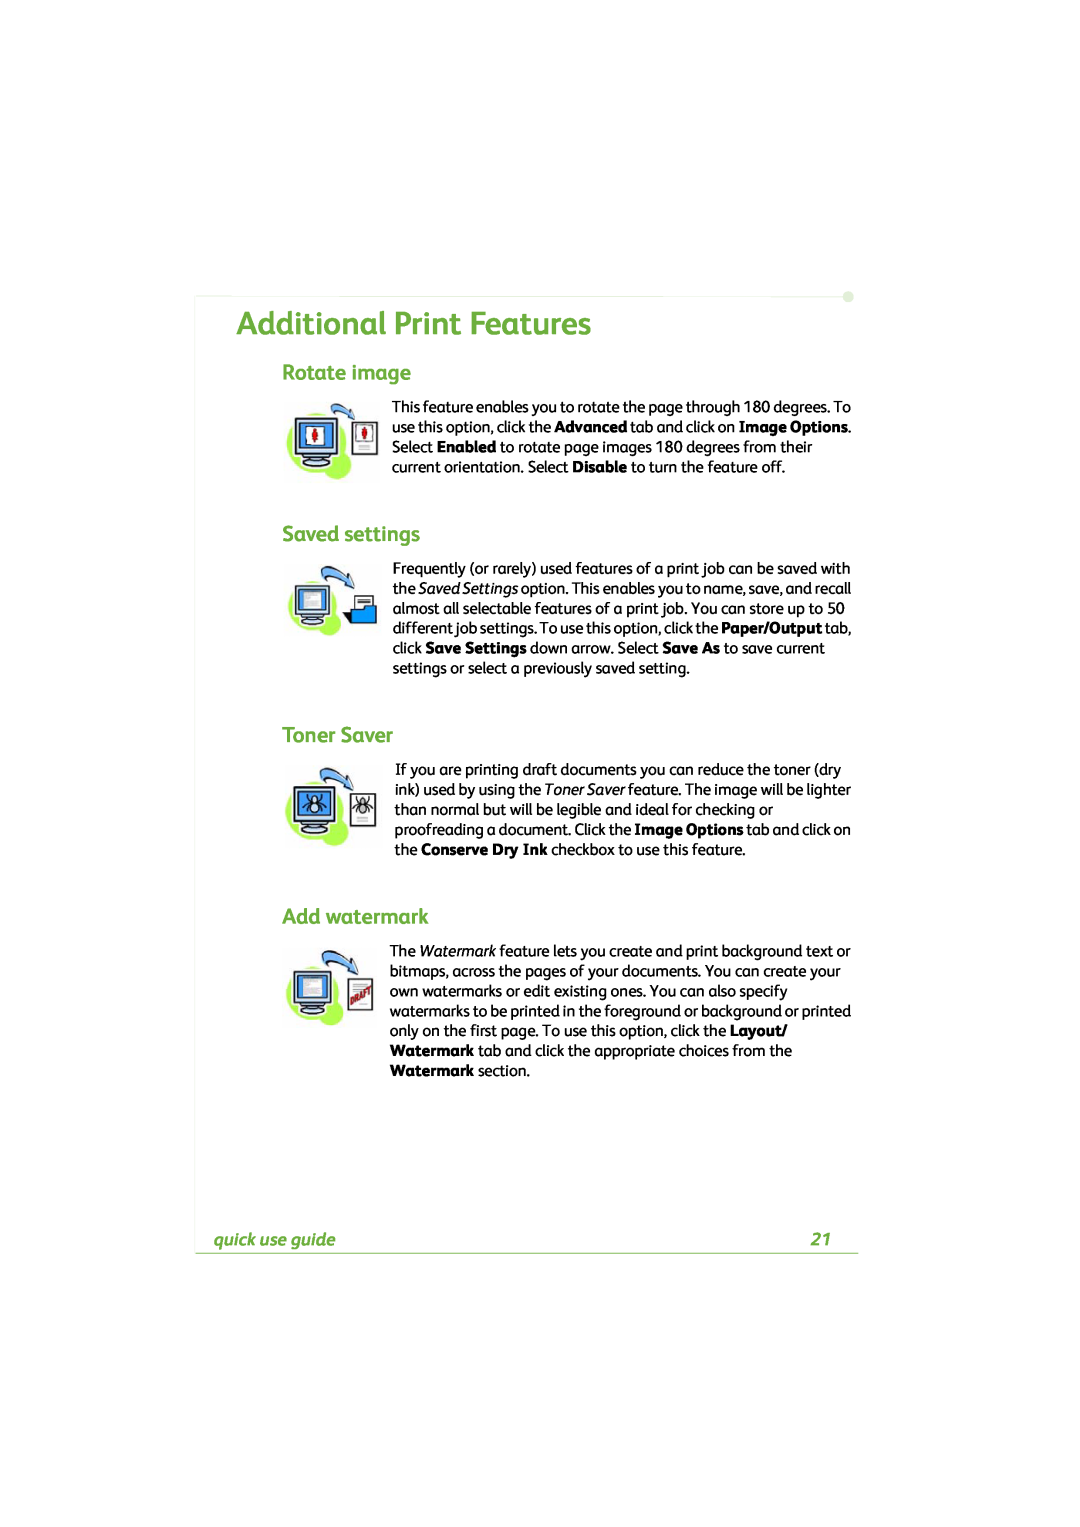 Xerox 4260C manual Additional Print Features, Rotate image, Saved settings, Toner Saver, Add watermark, quick use guide 